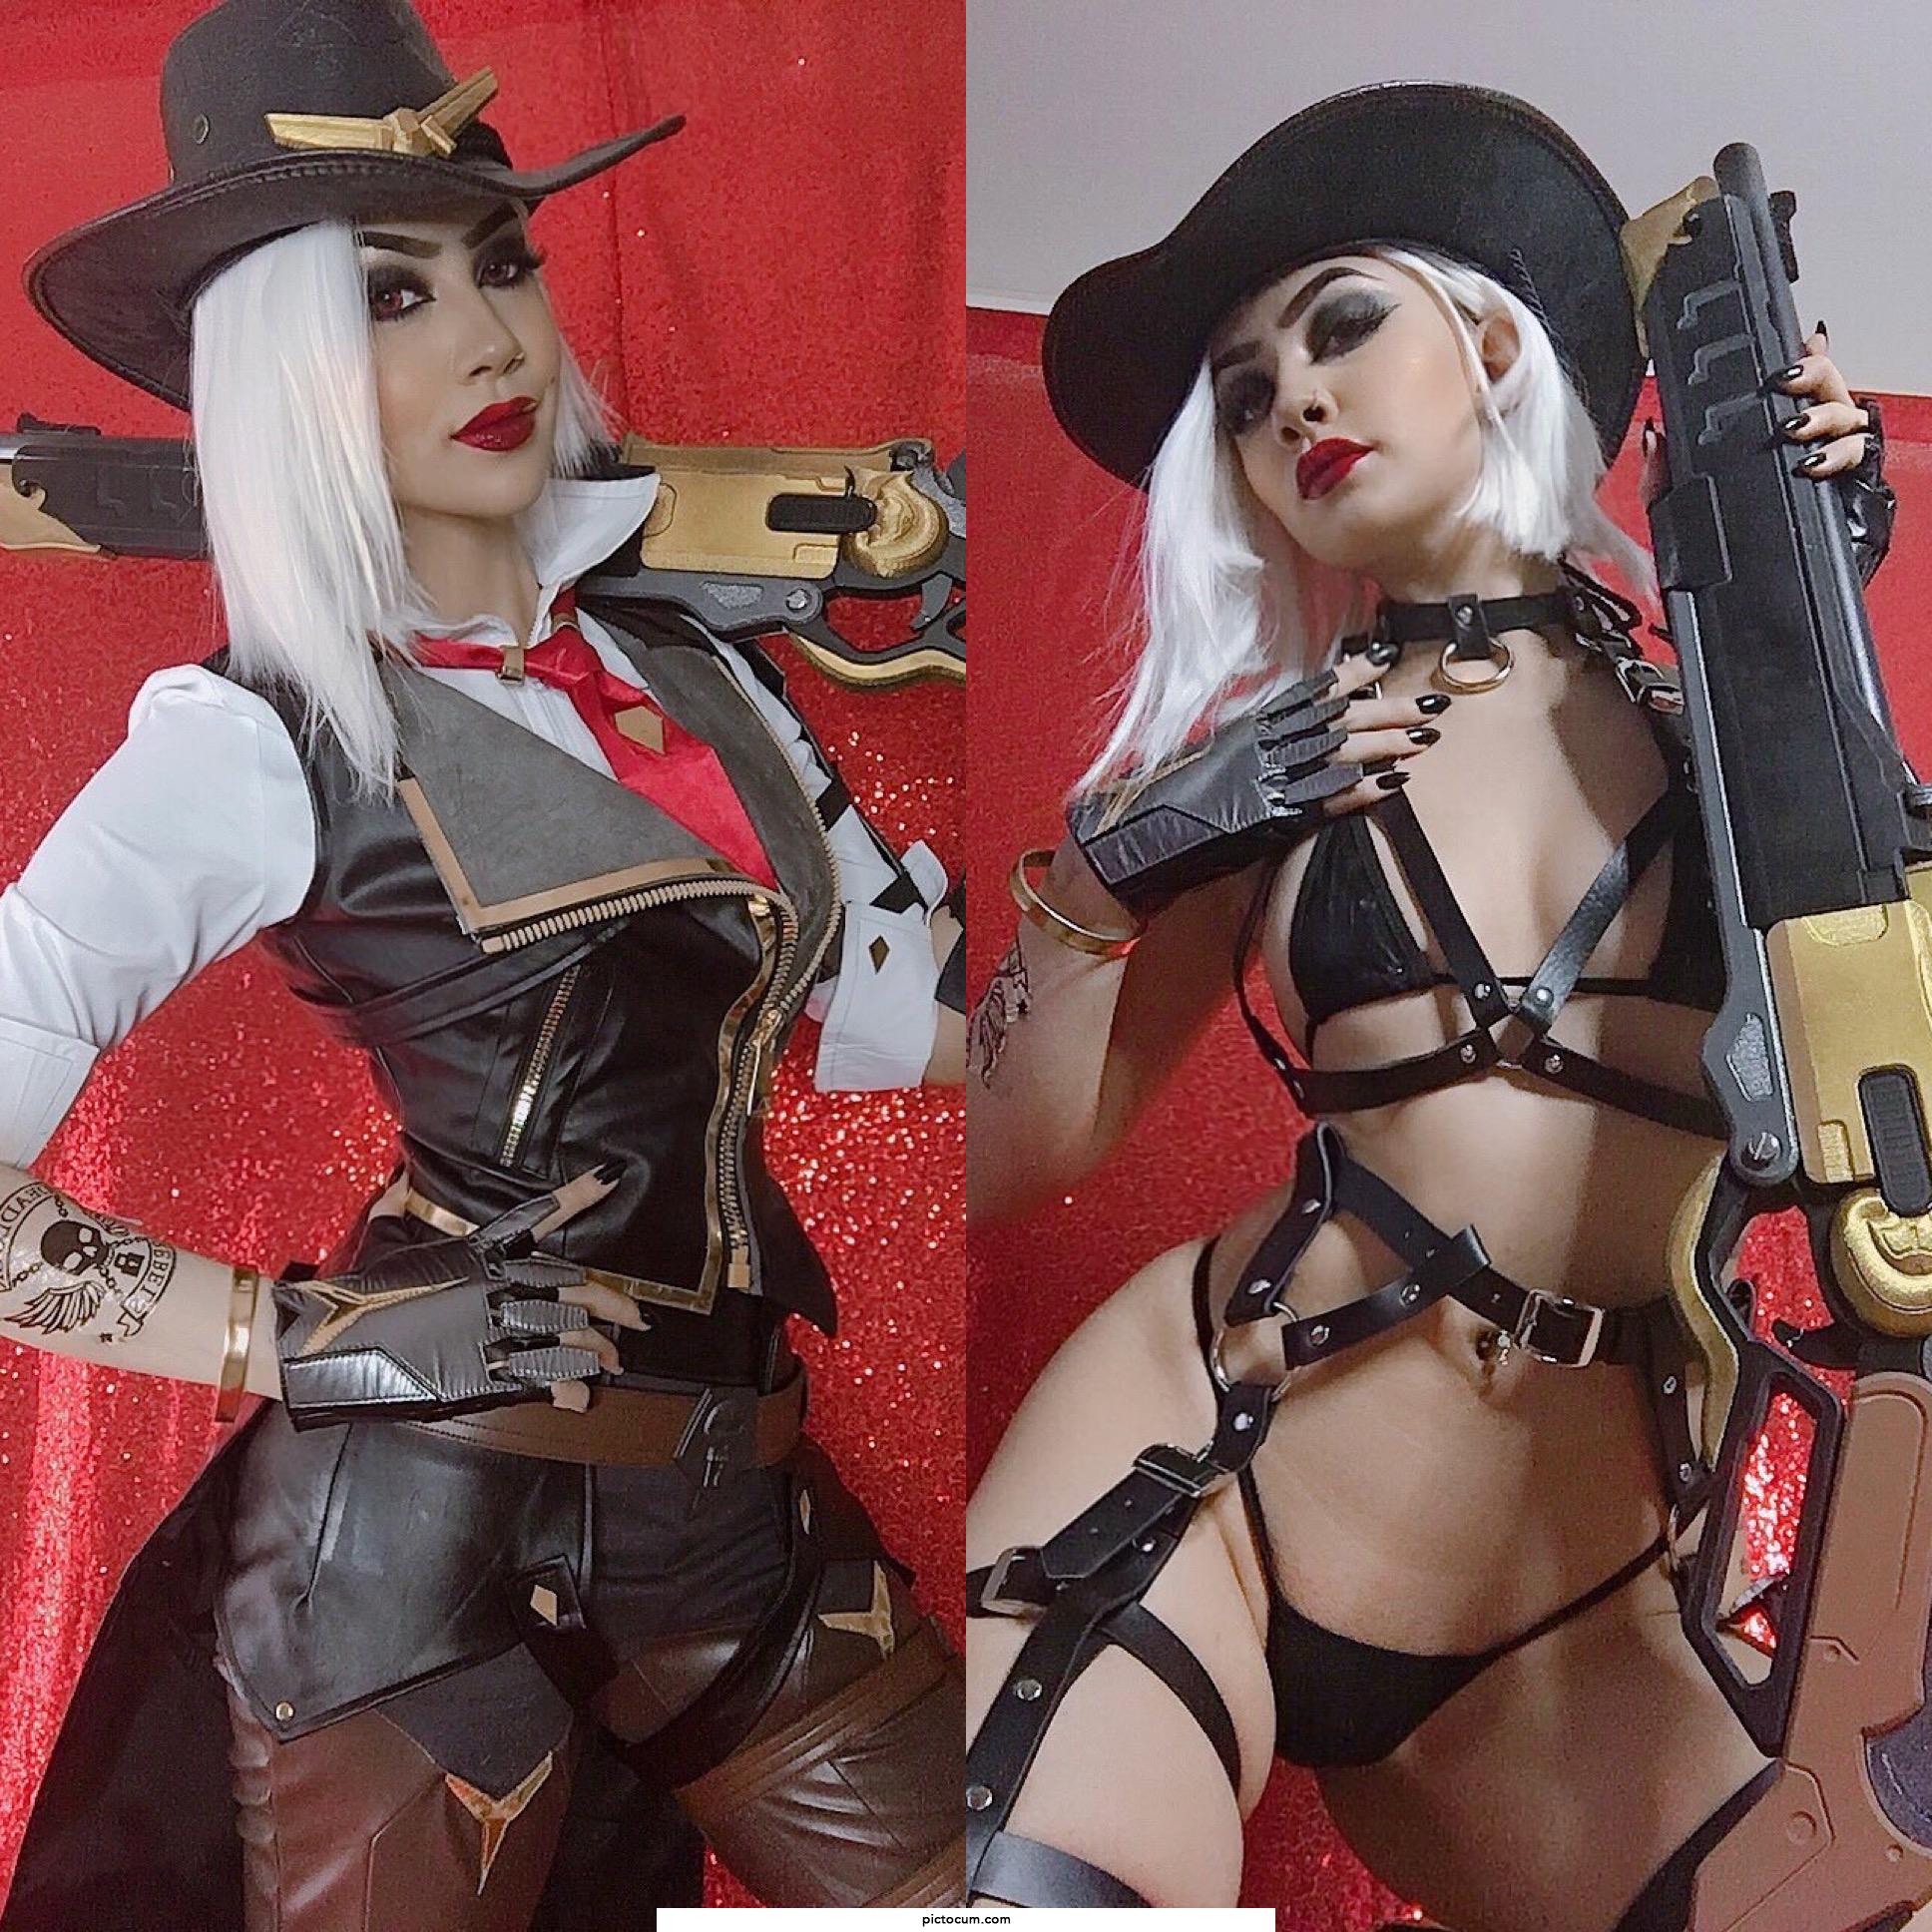 Ashe from Overwatch on/off cosplay by Felicia Vox